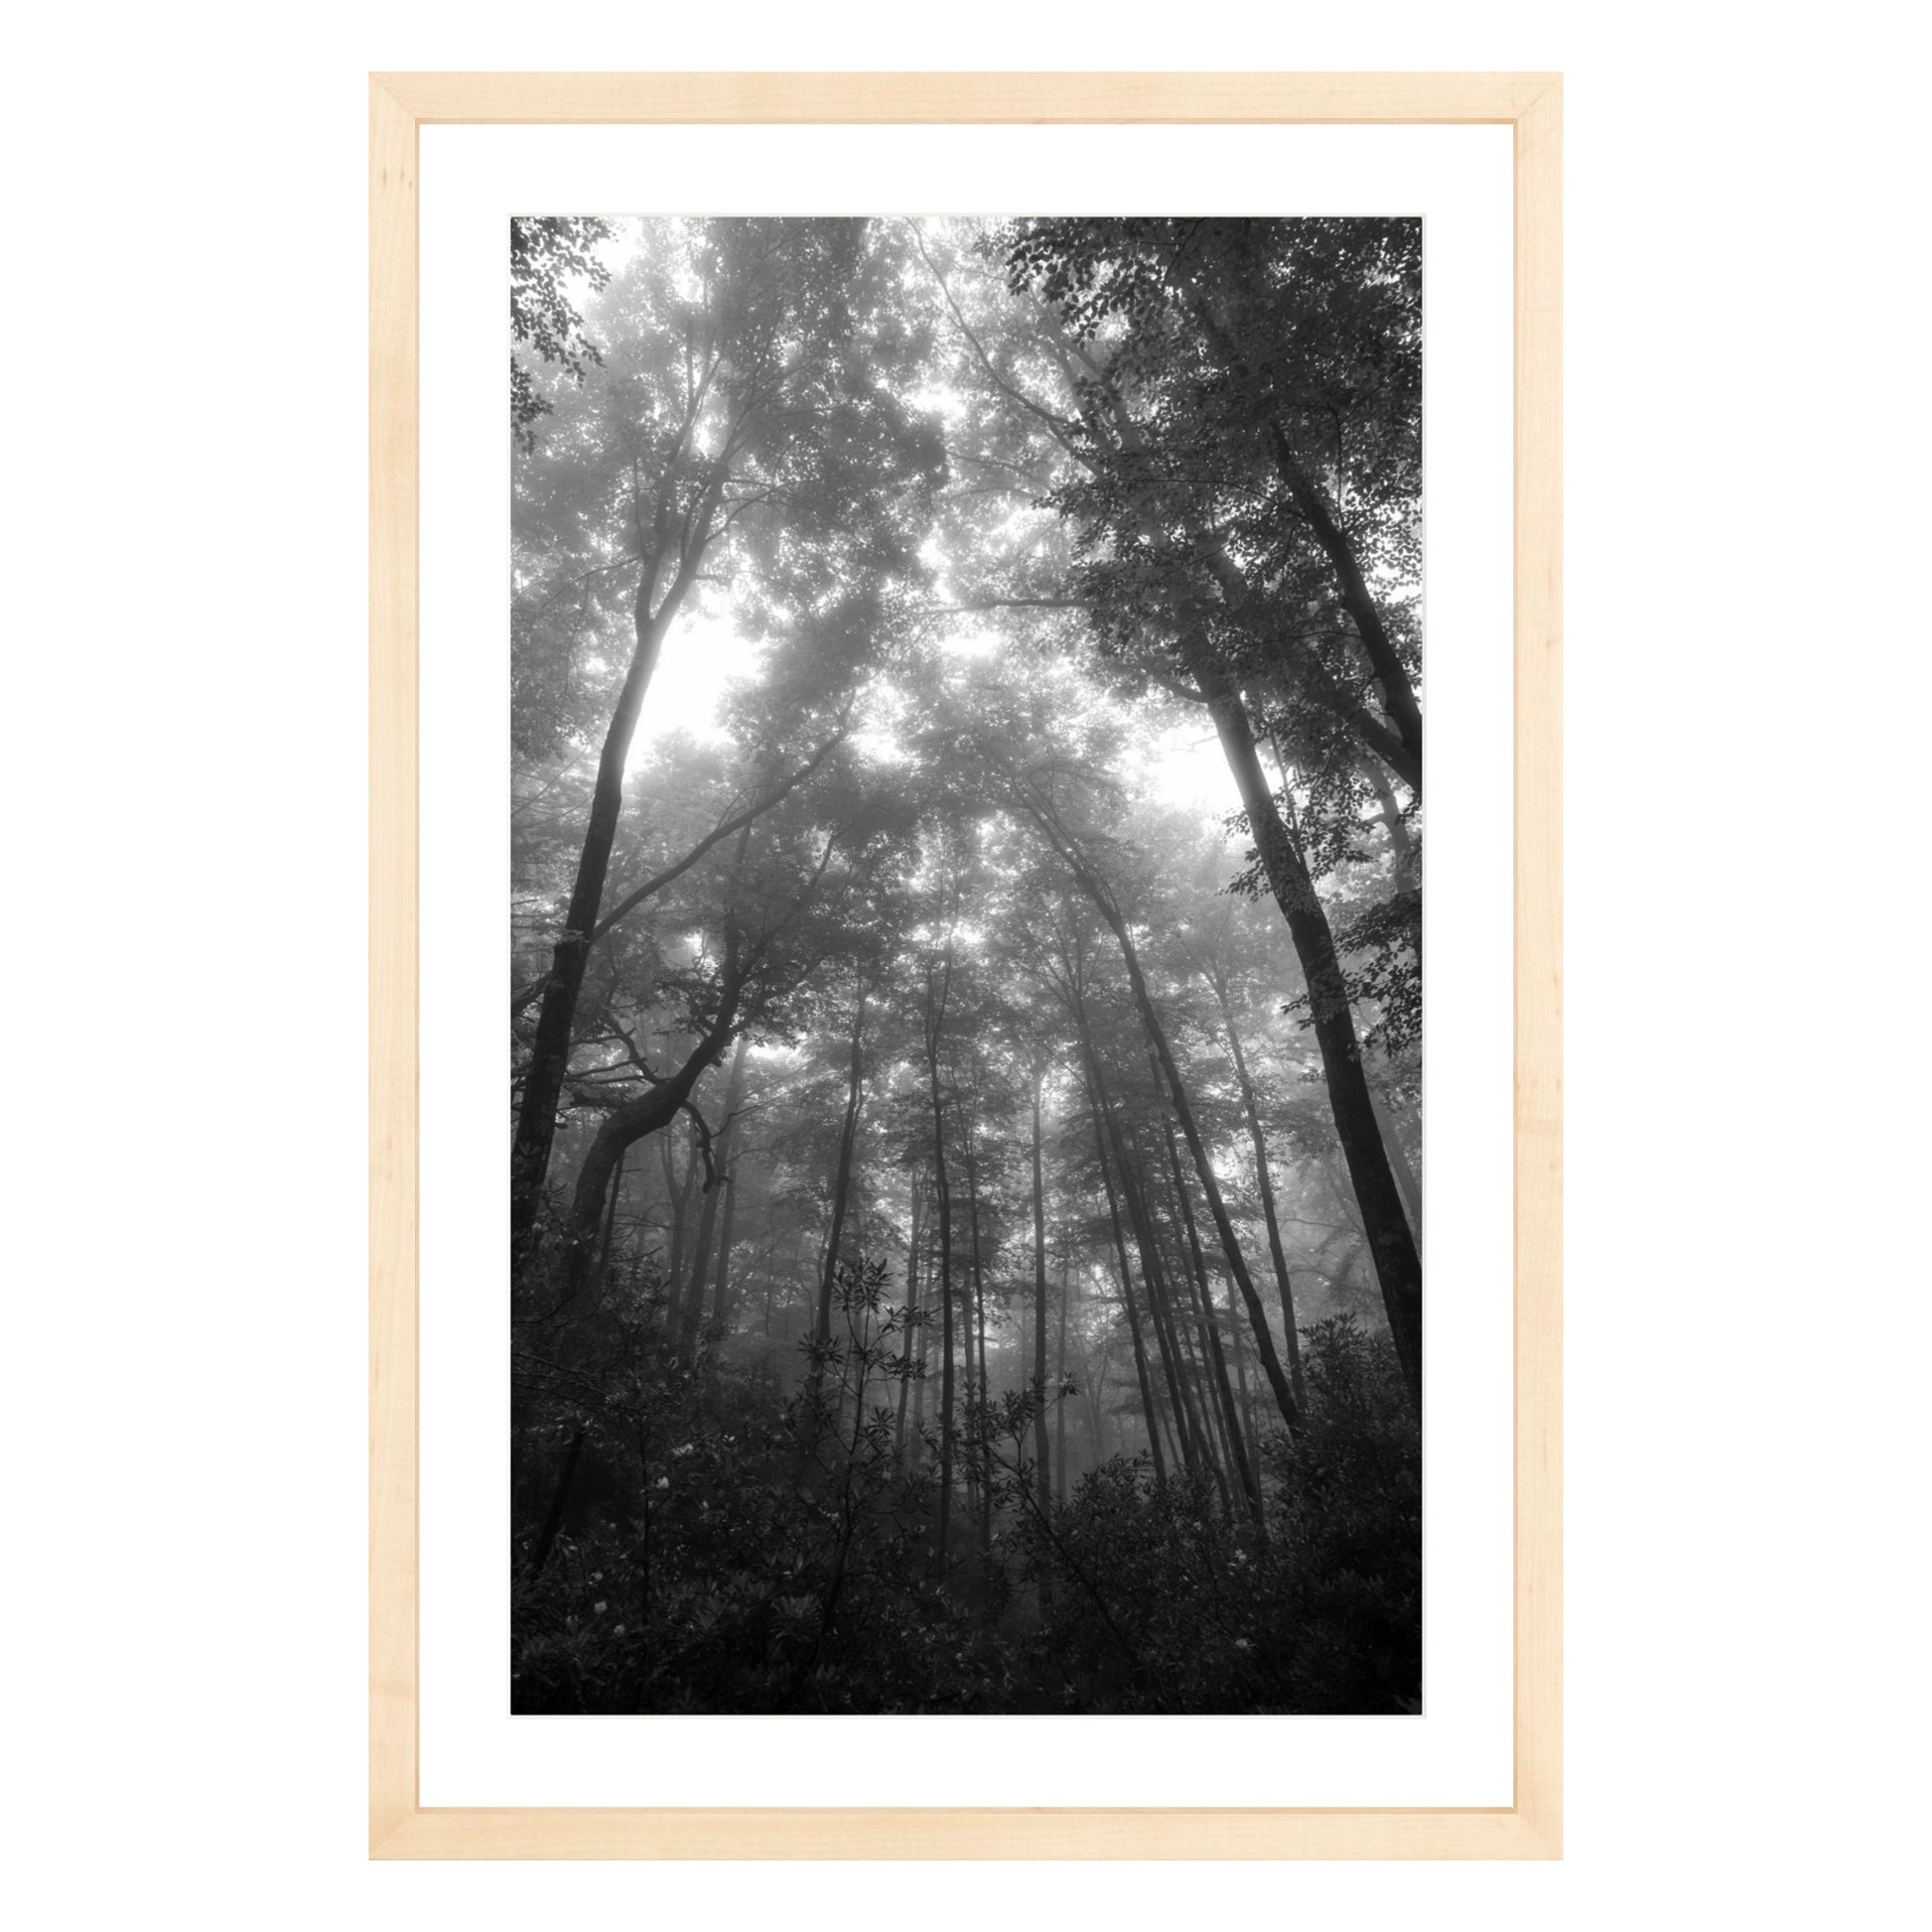 Black and white photograph of trees in misty fog in North Carolina framed in natural wood with white mat